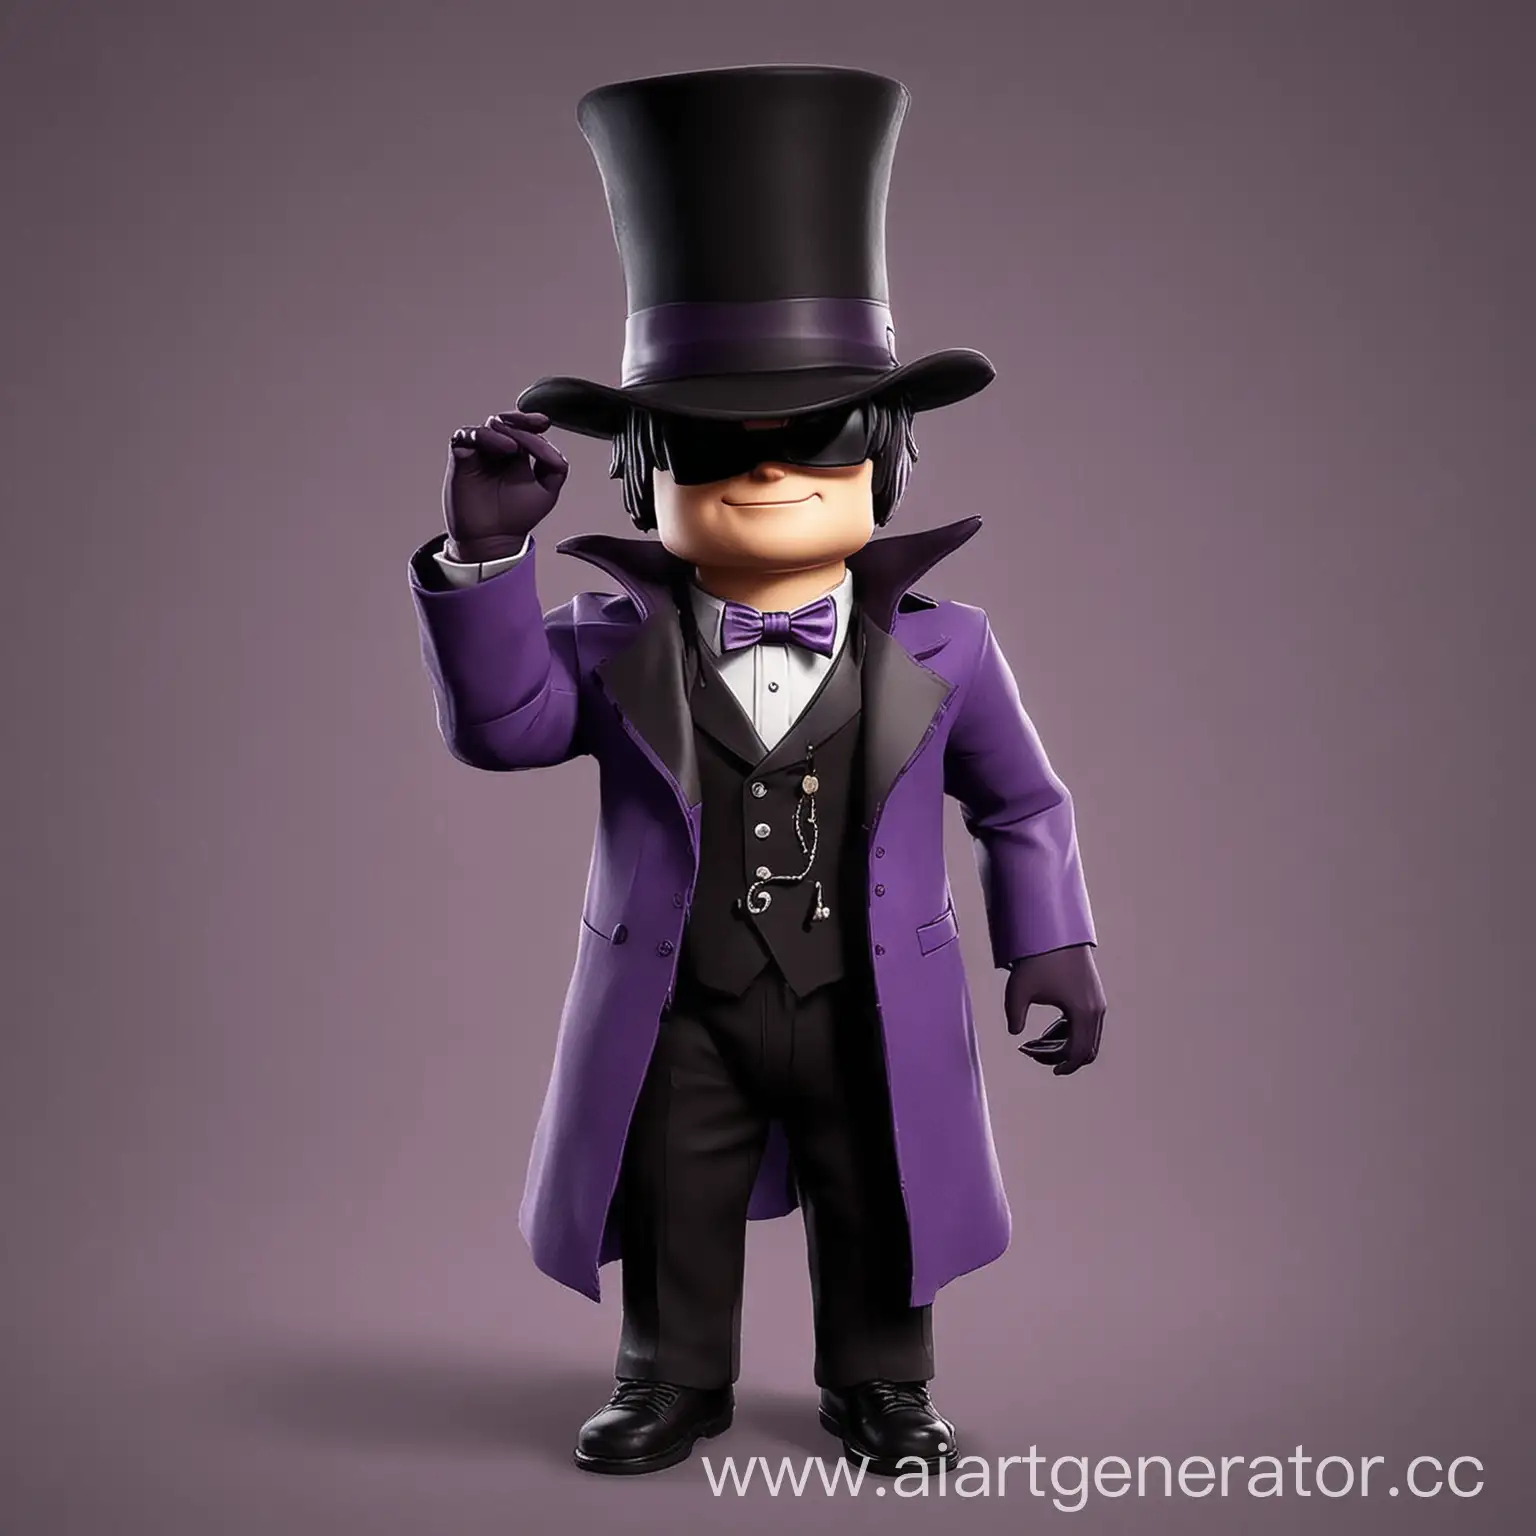 Roblox-Man-Winking-with-Purple-Theme-and-Top-Hat